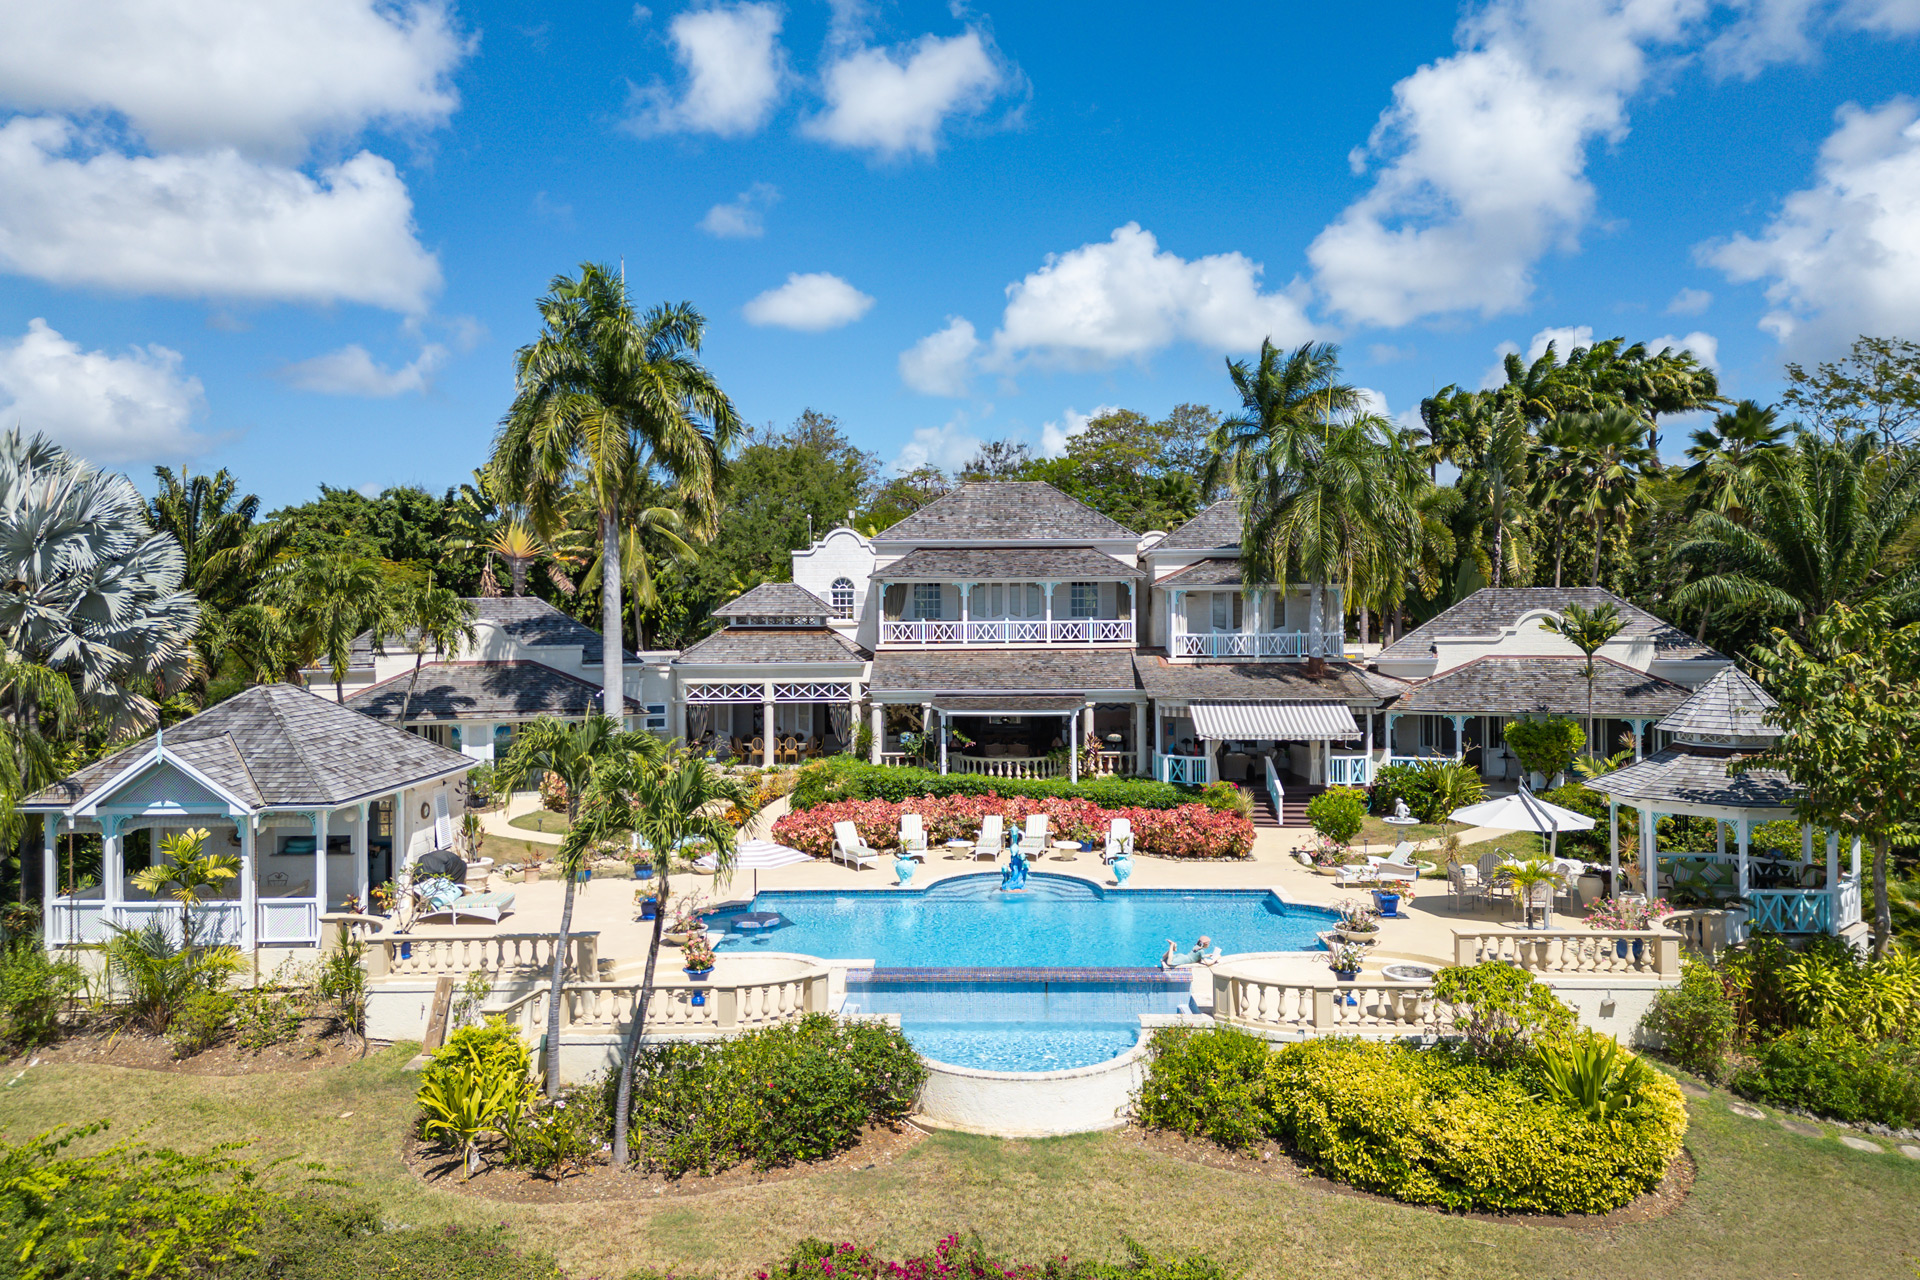 Exterior view of Barbados mansion, with swimming pool, terraces and gardens.